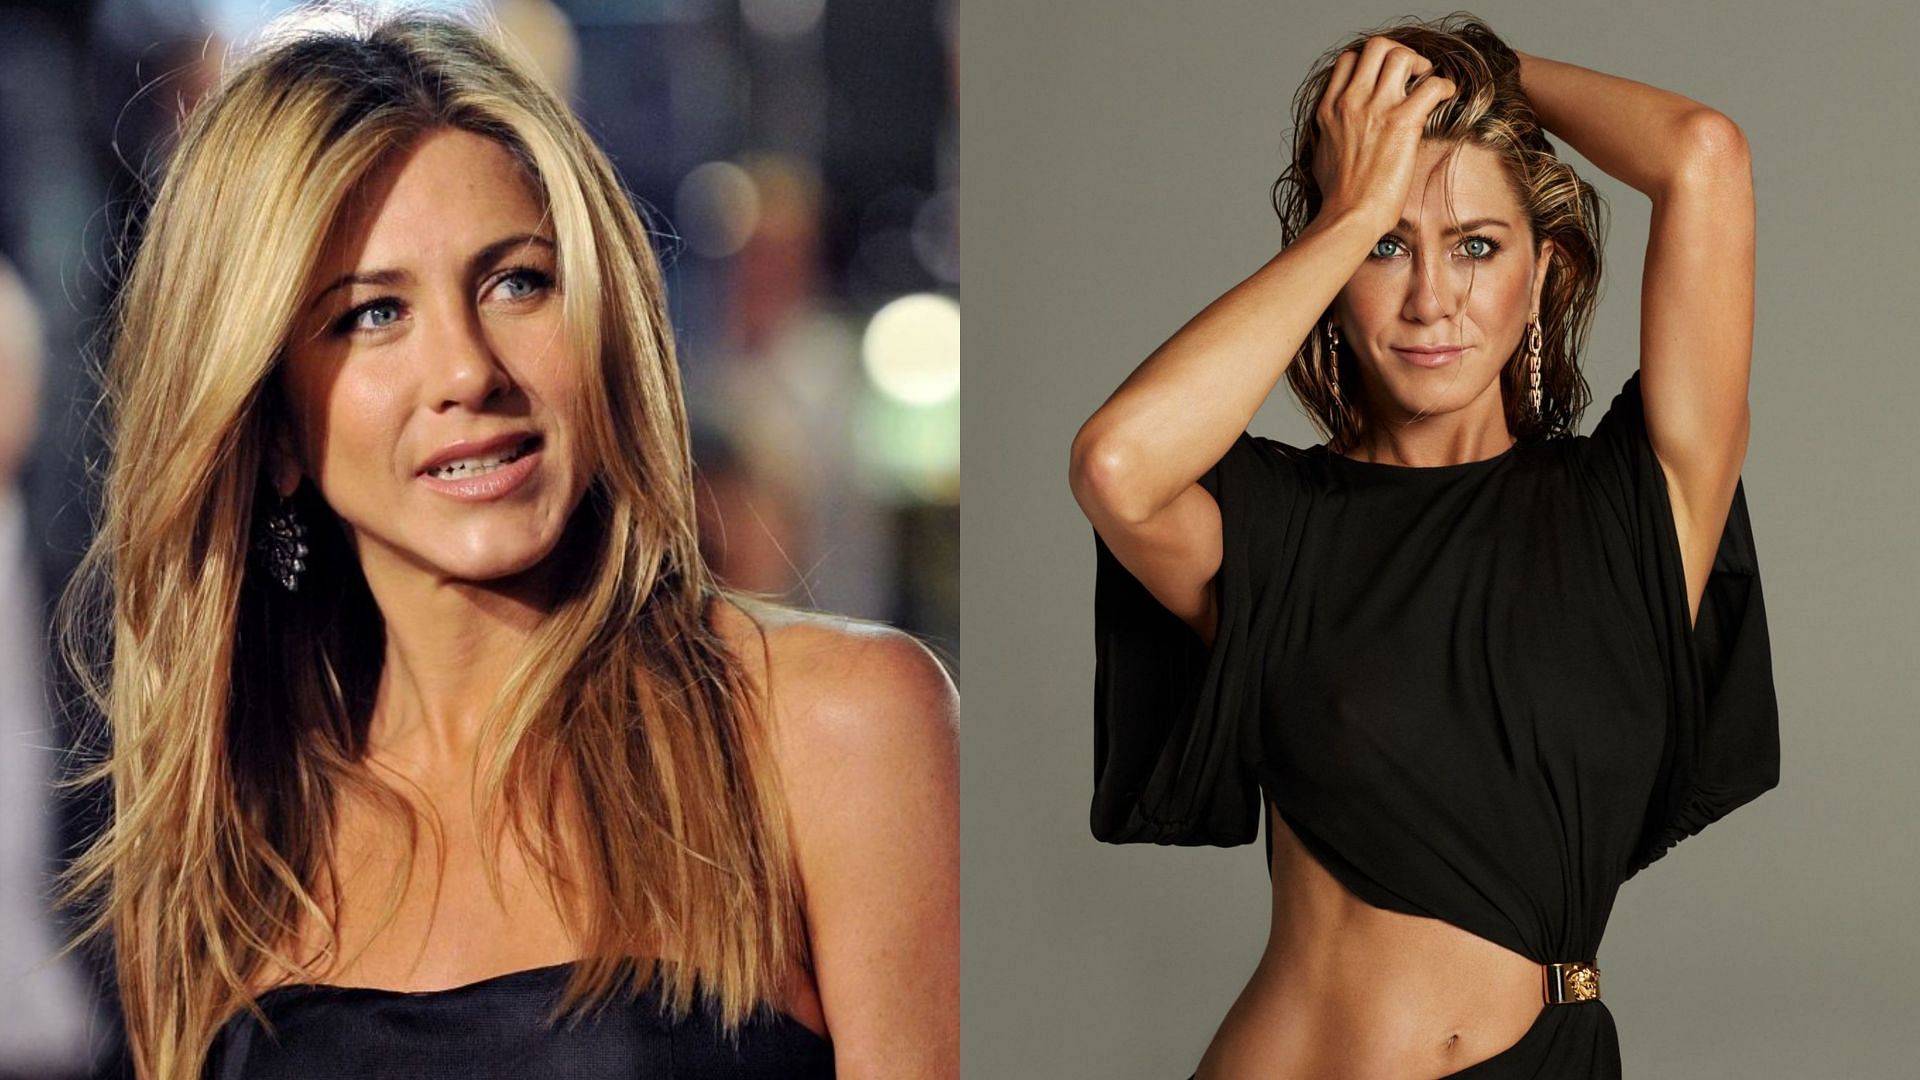 Jennifer Aniston was rumored to have a relationship with WWE legend Rey Mysterio in 1997